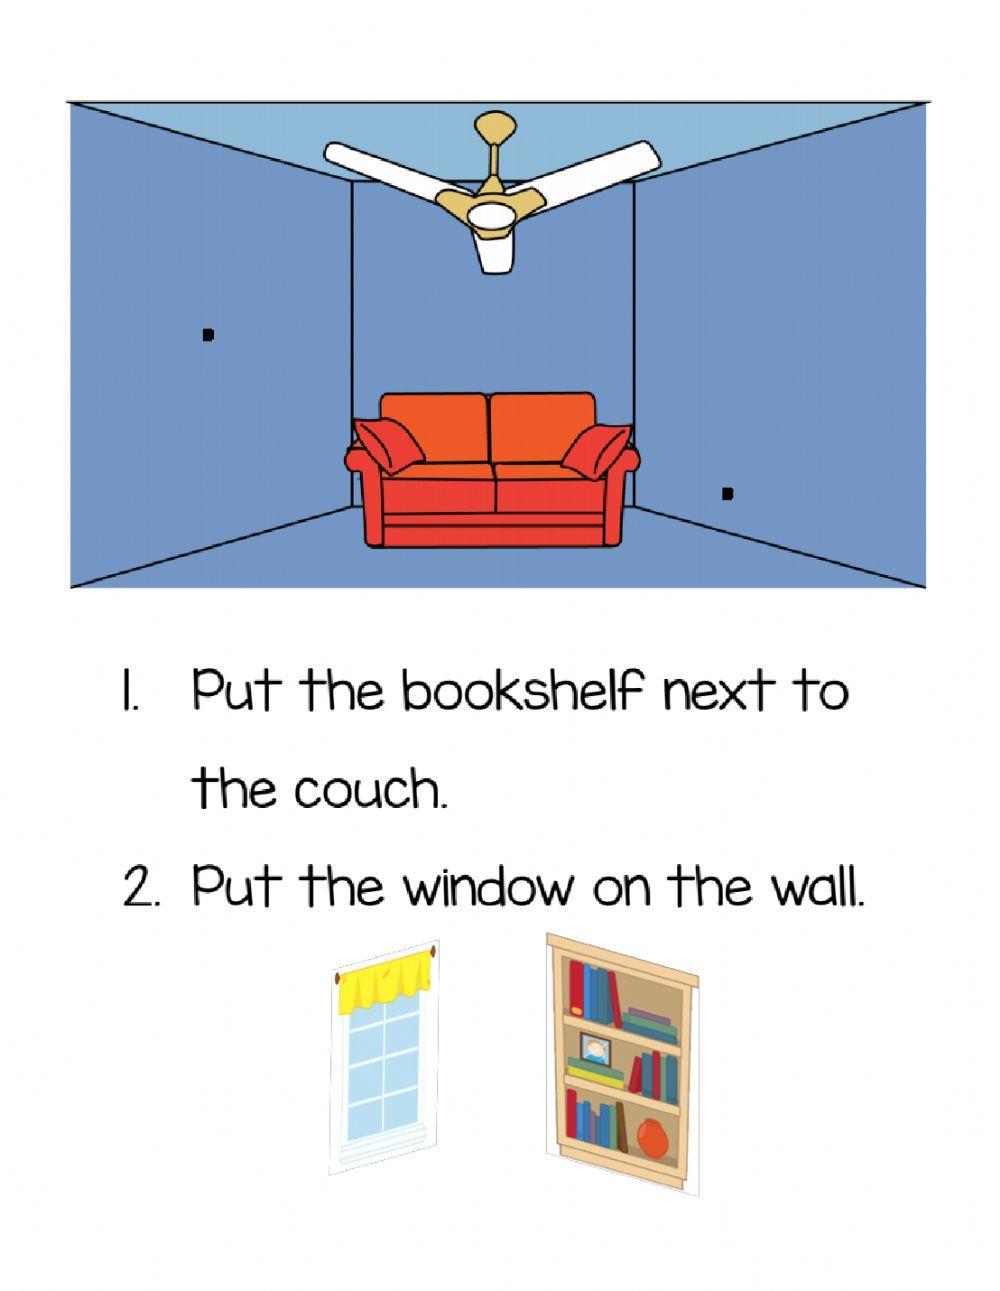 Following directions in the living room